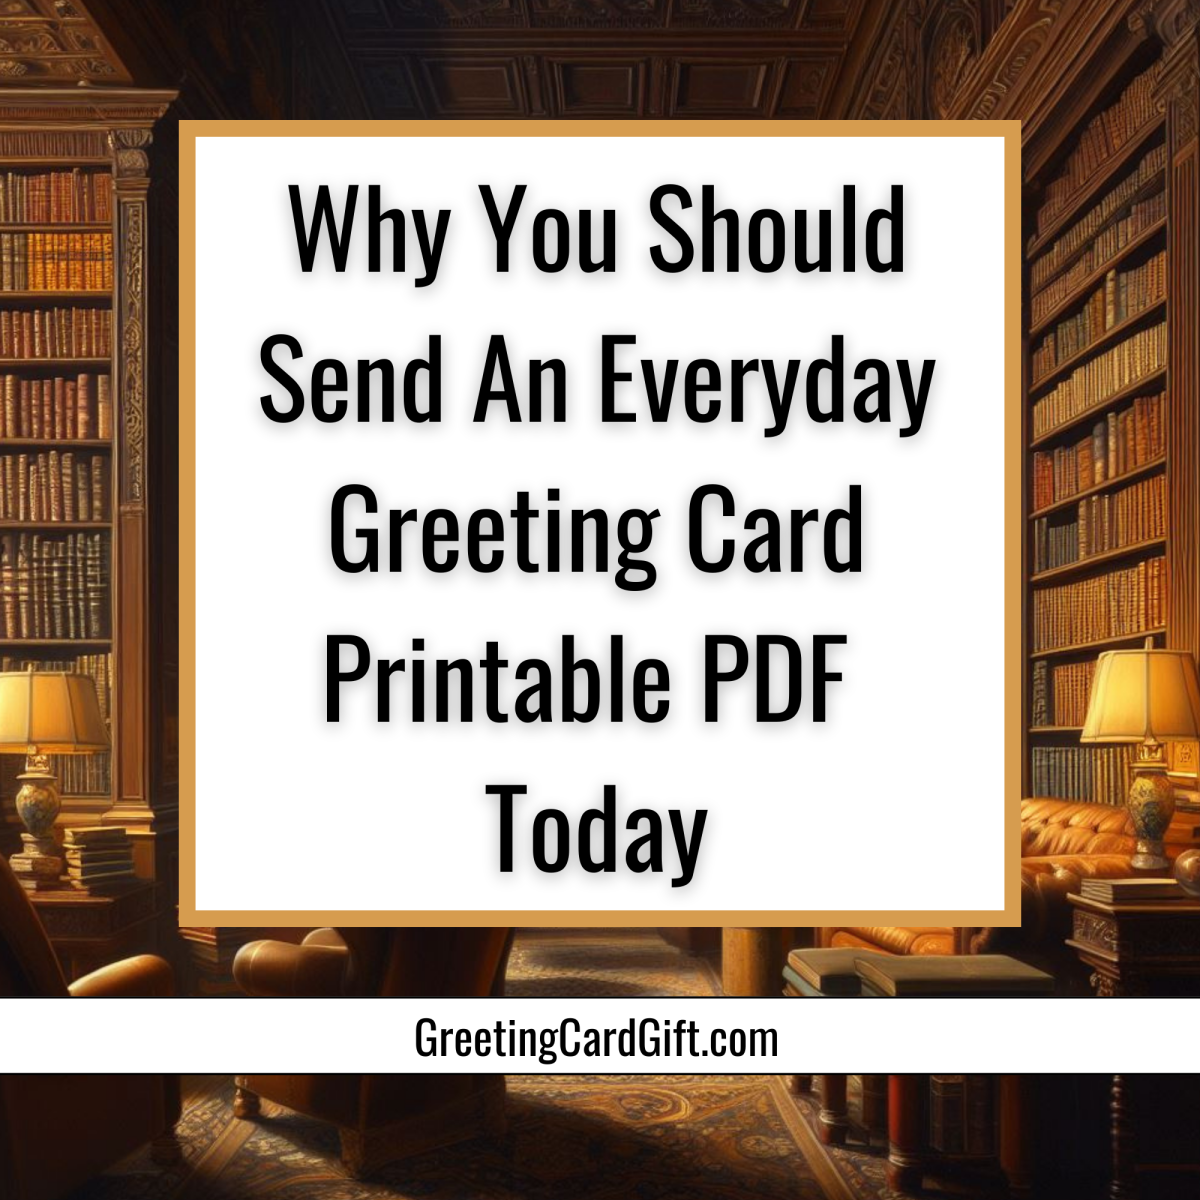 Why You Should Send An Everyday Greeting Card Printable PDF Today